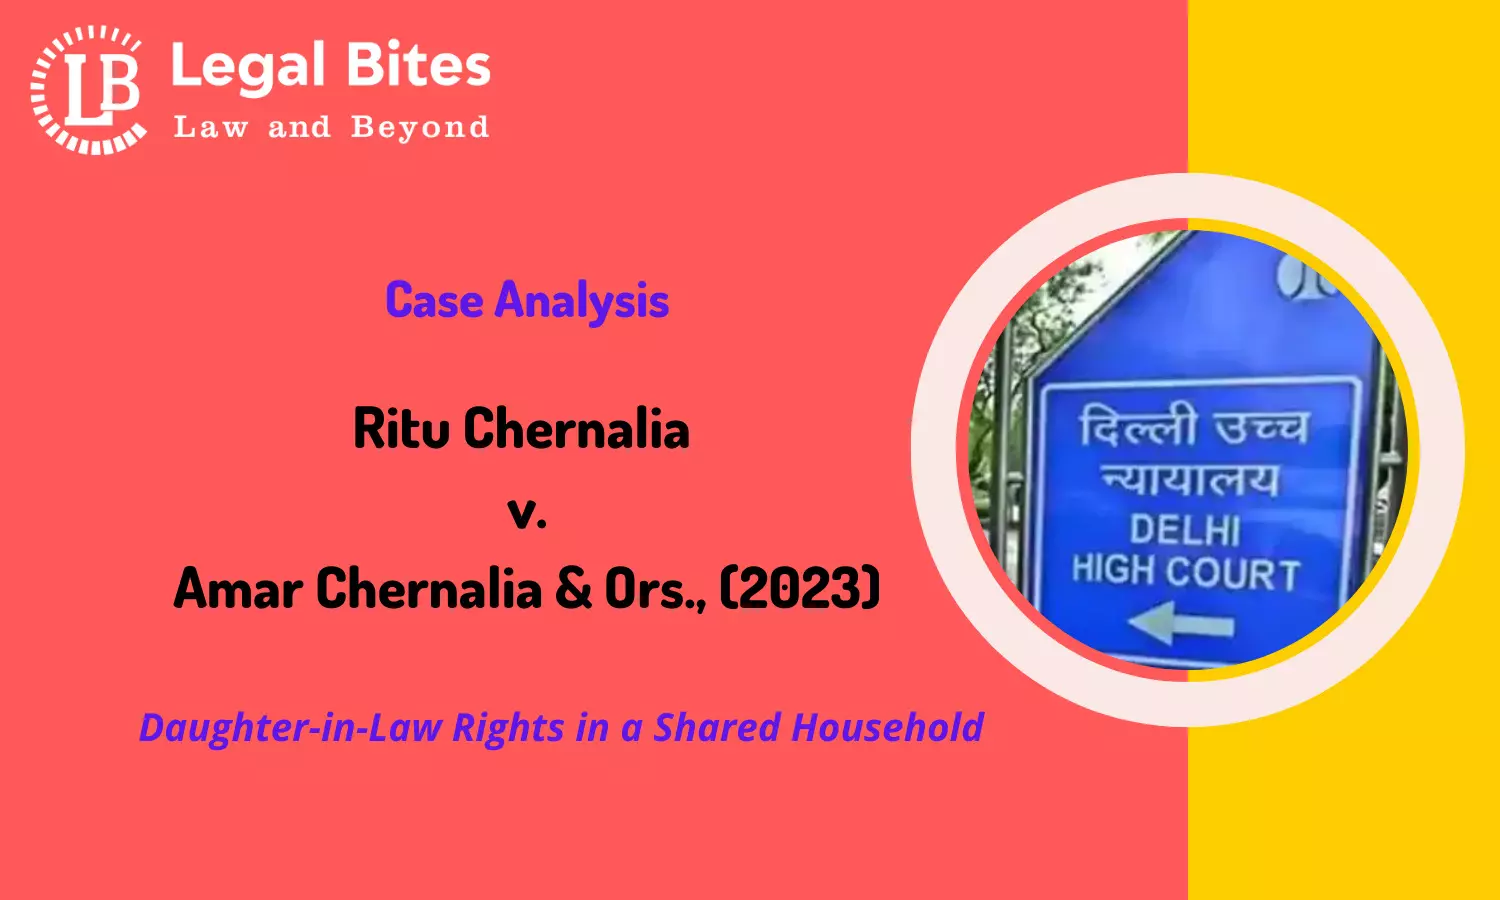 Case Analysis: Ritu Chernalia v. Amar Chernalia & Ors., (2023) | Daughter-in-Law Rights in a Shared Household